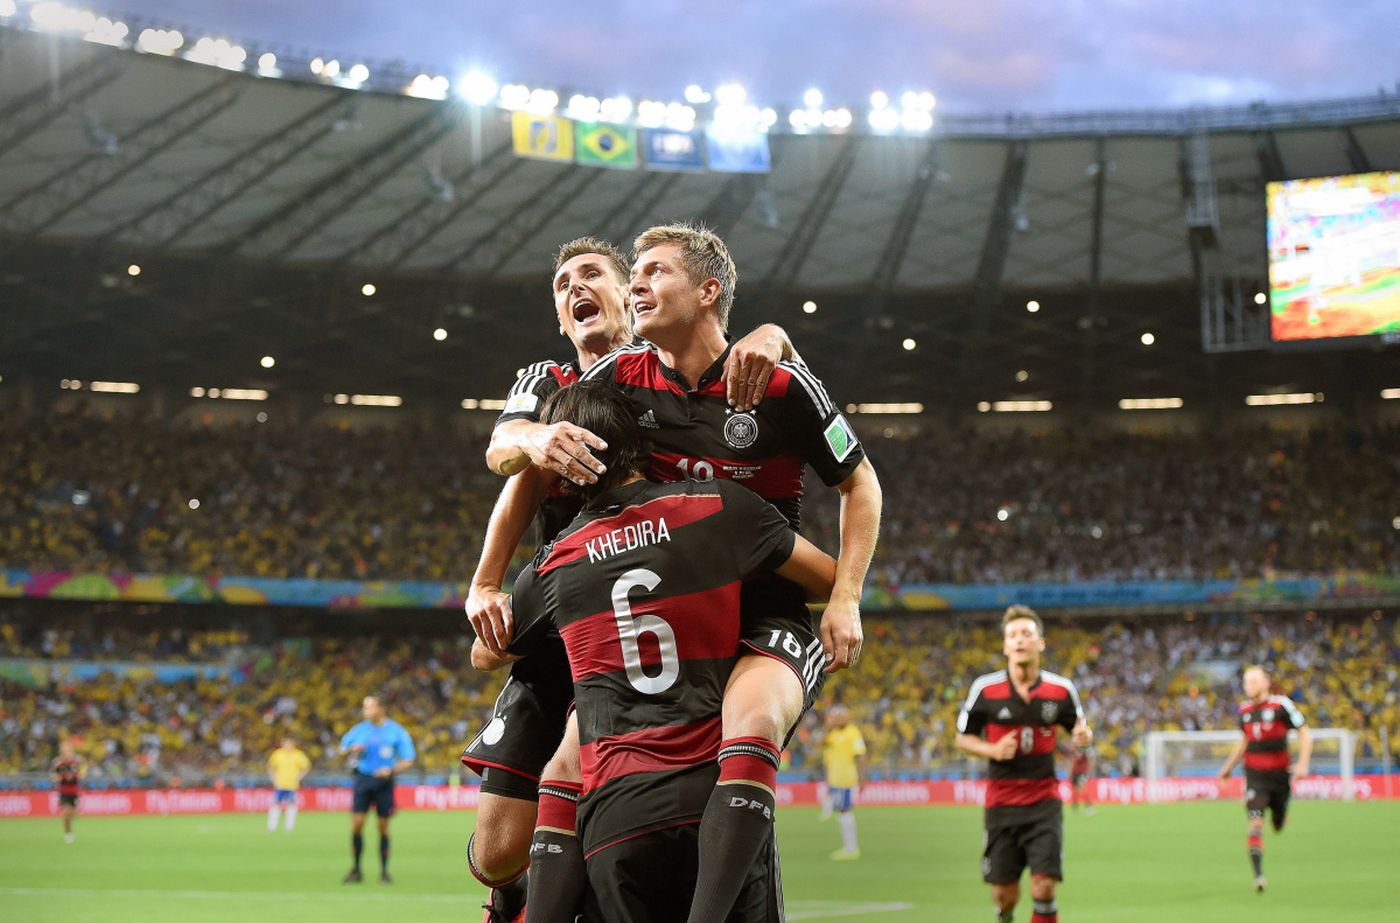 Germans Celebrating at the 2014 World Cup